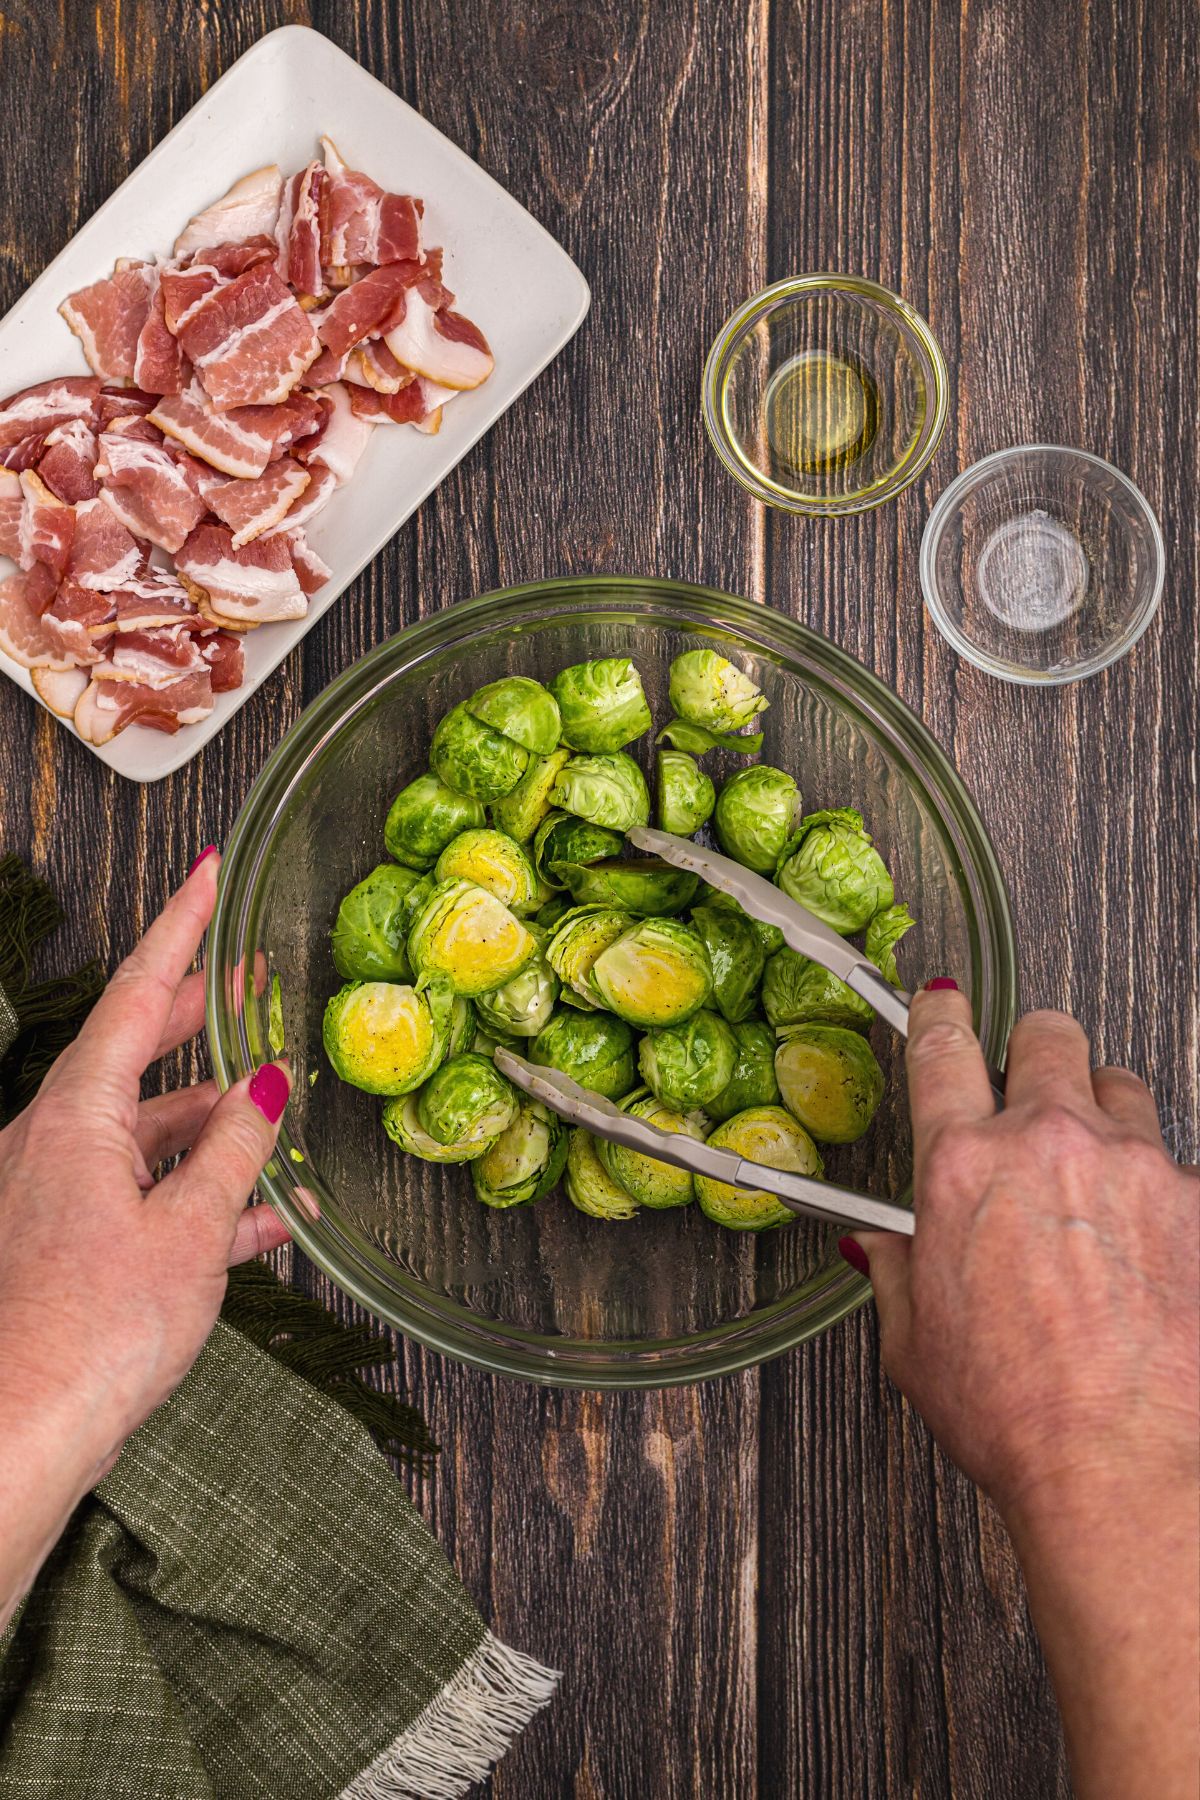 Cut green brussels sprouts being tossed with olive oil and seasonings in a clear mixing bowl on a wooden table.